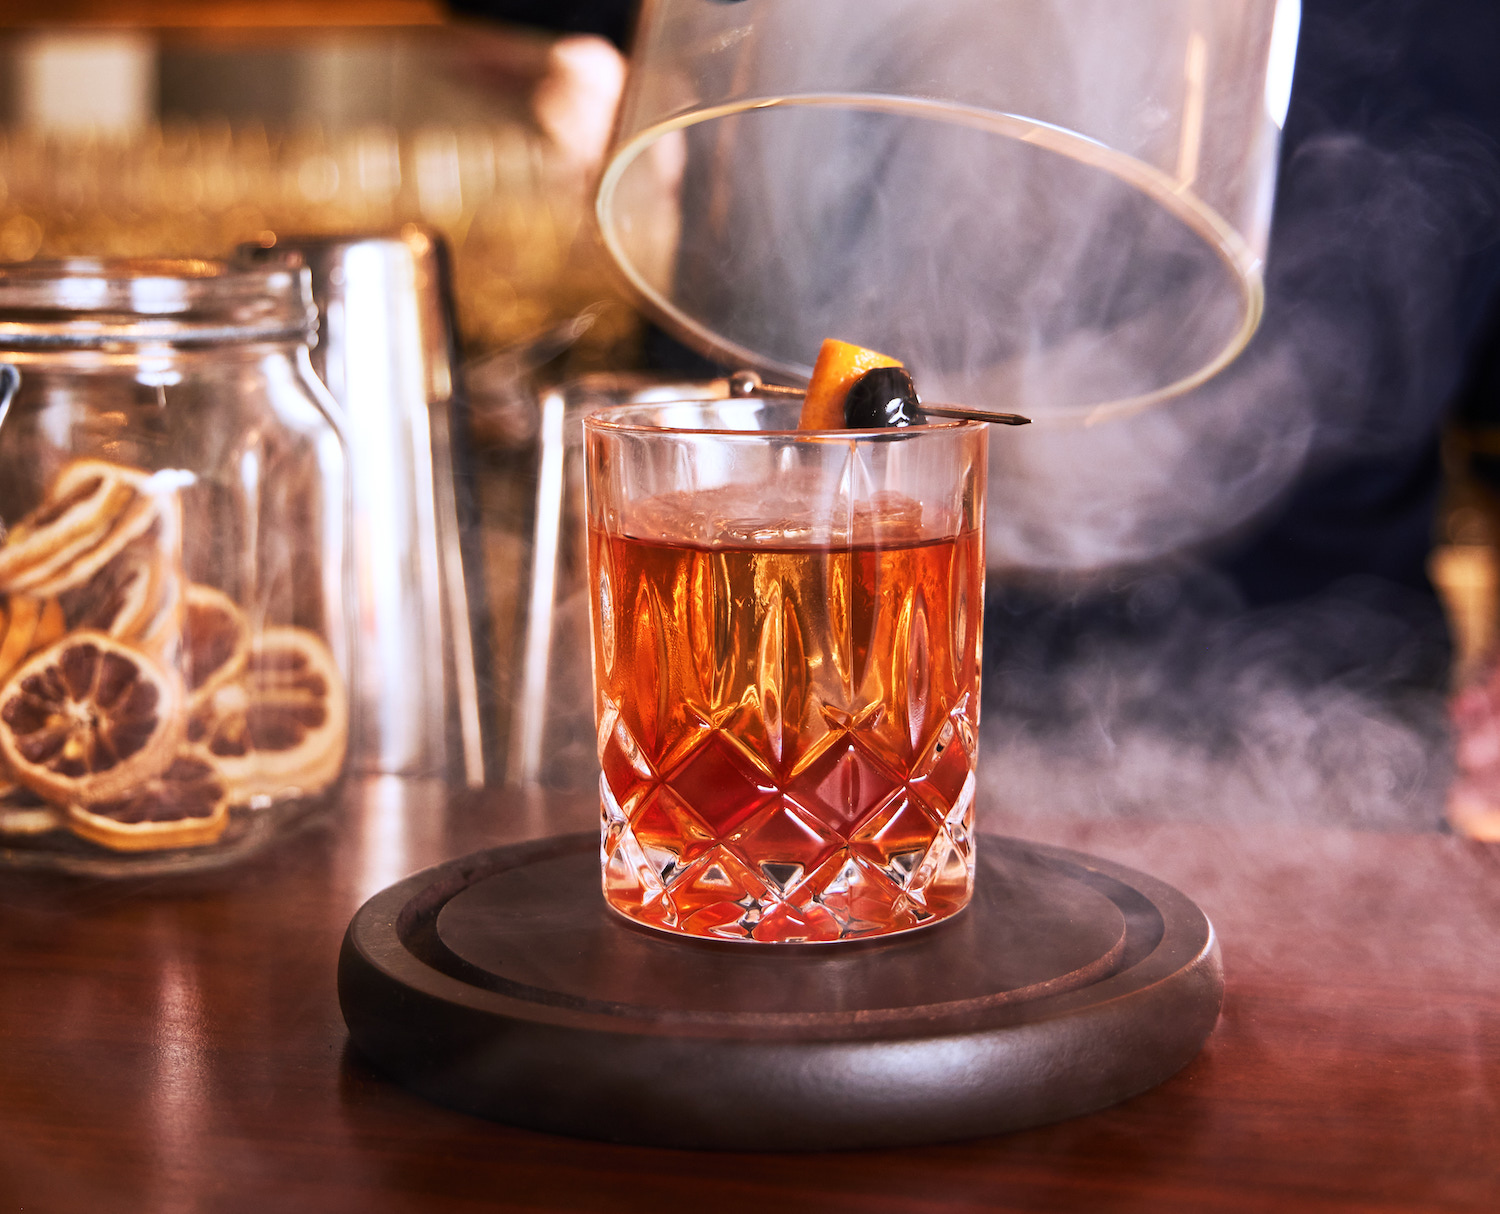 The Kronos cocktail begins with an infusion of six-year-old rye whiskey and lamb fat